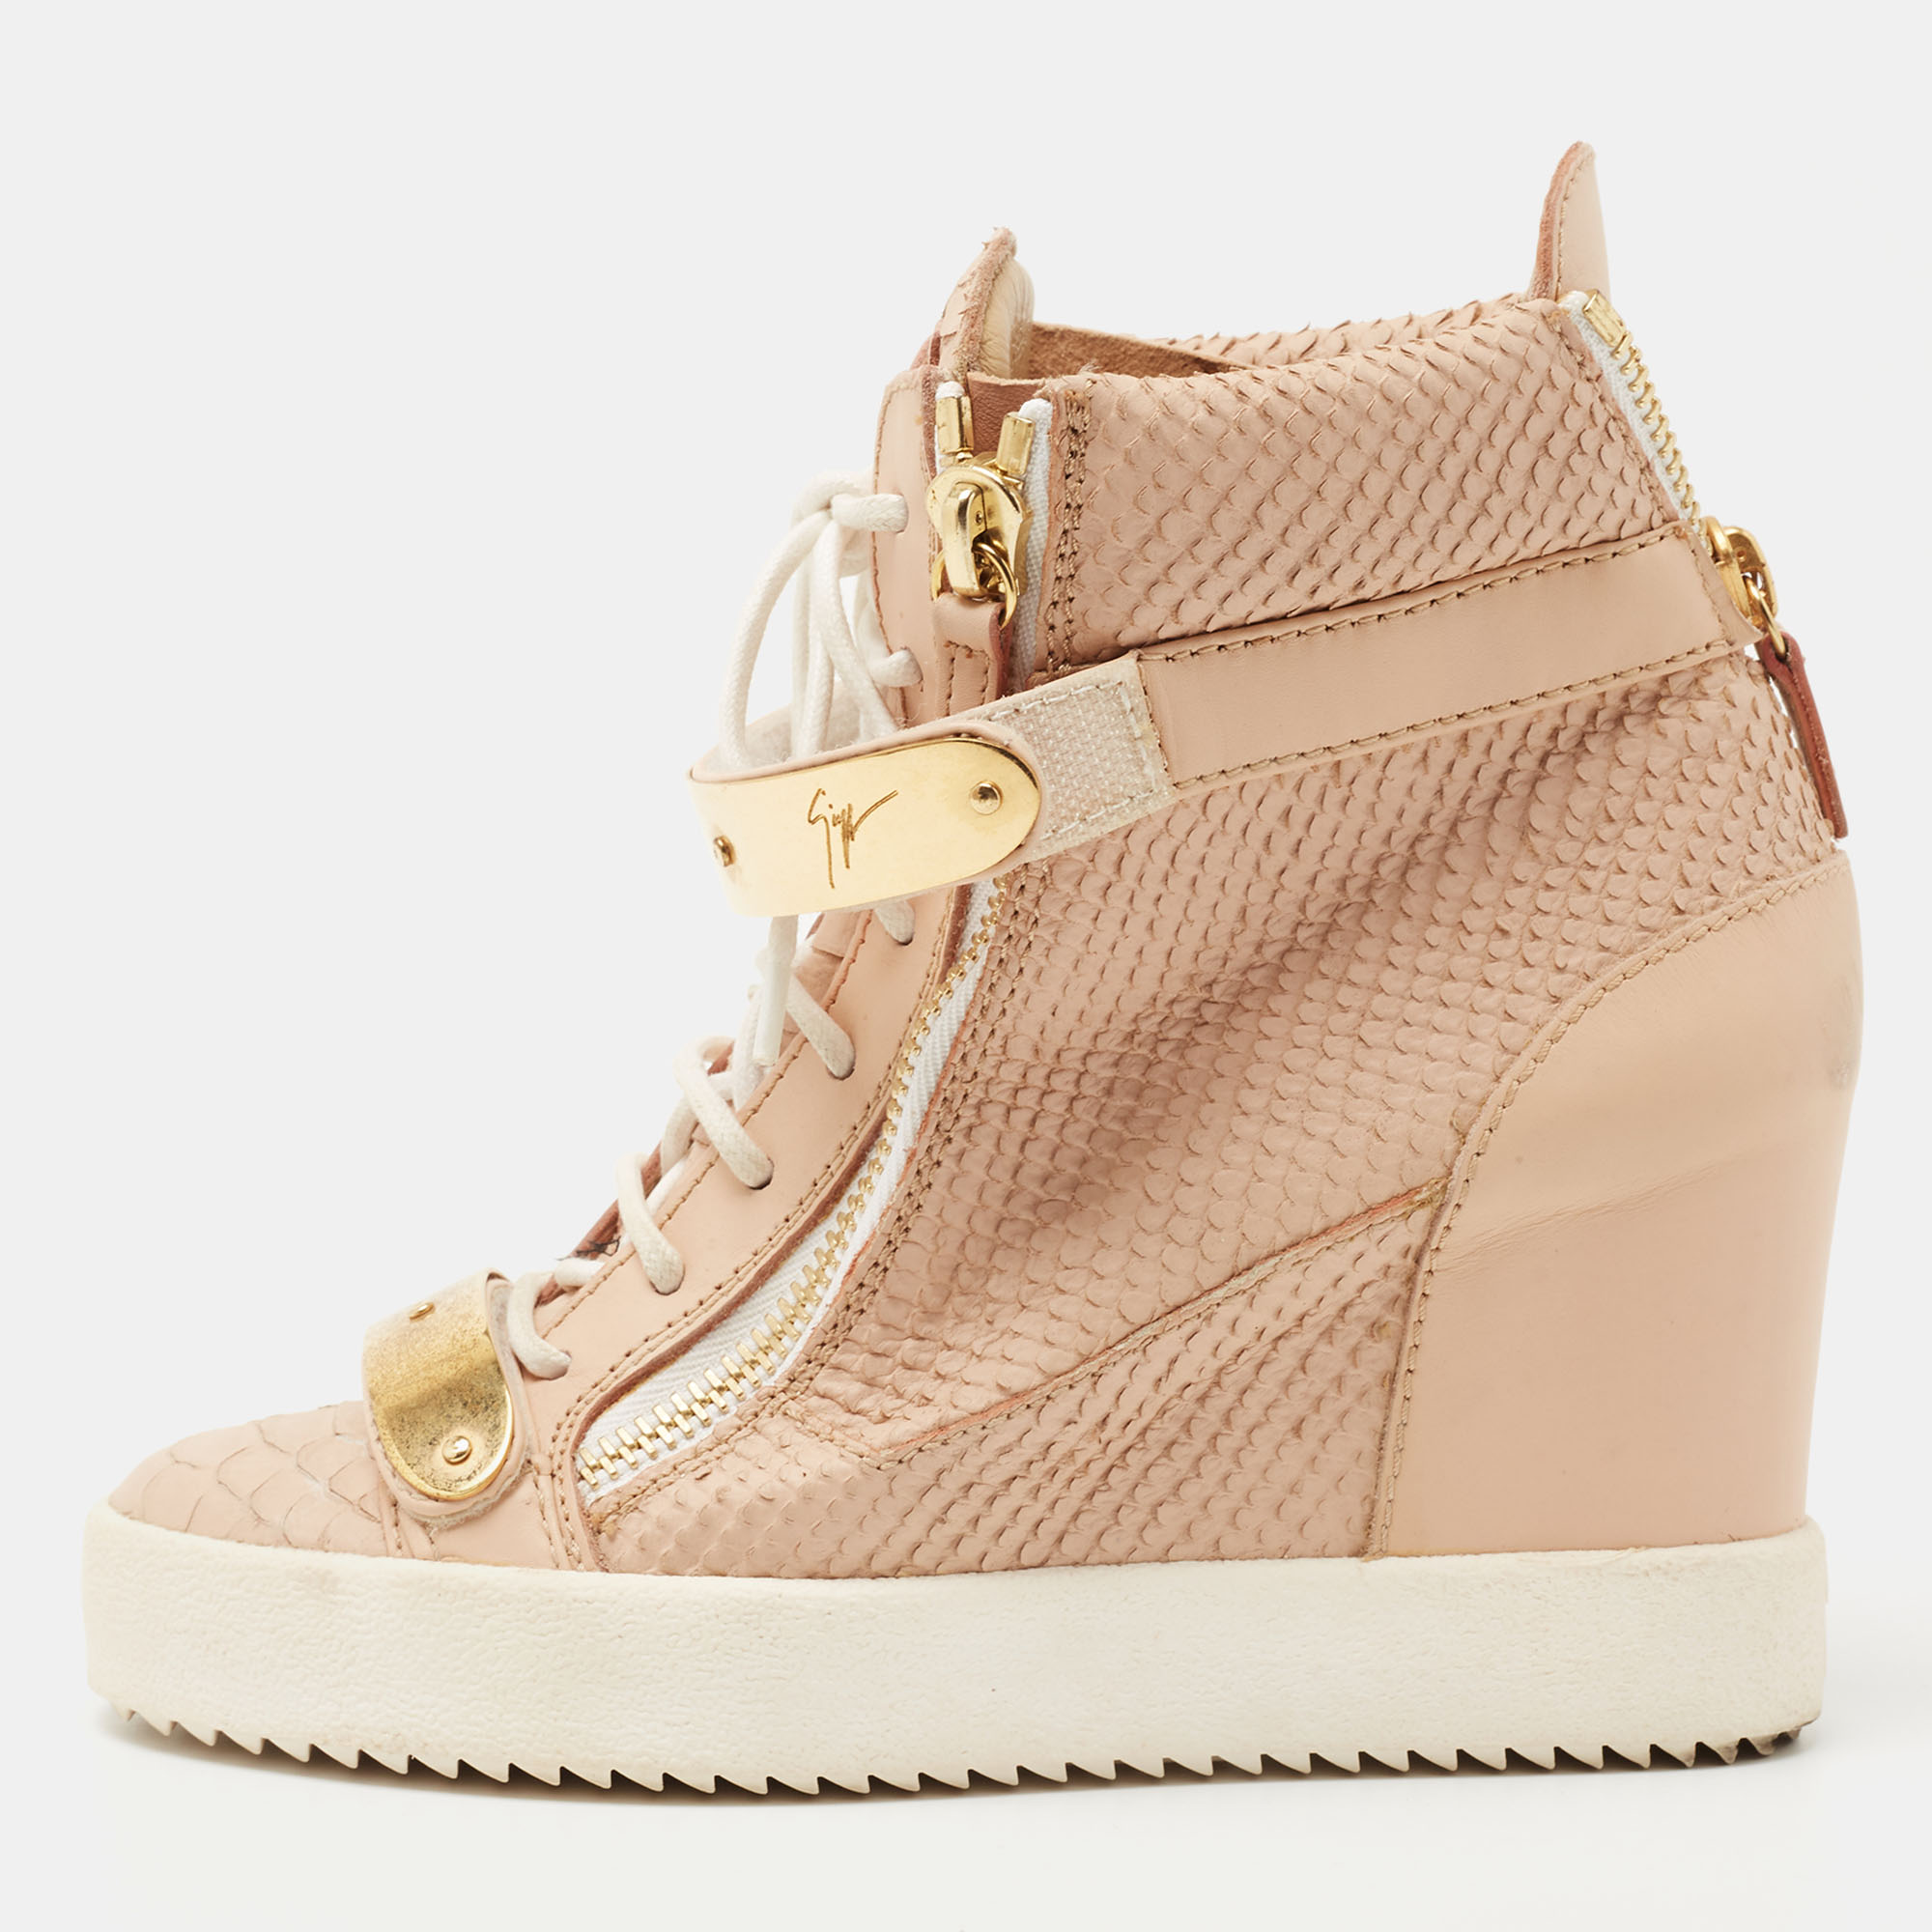 Pre-owned Giuseppe Zanotti Peach Pink Python Embossed Leather Coby Wedge Trainers Size 38